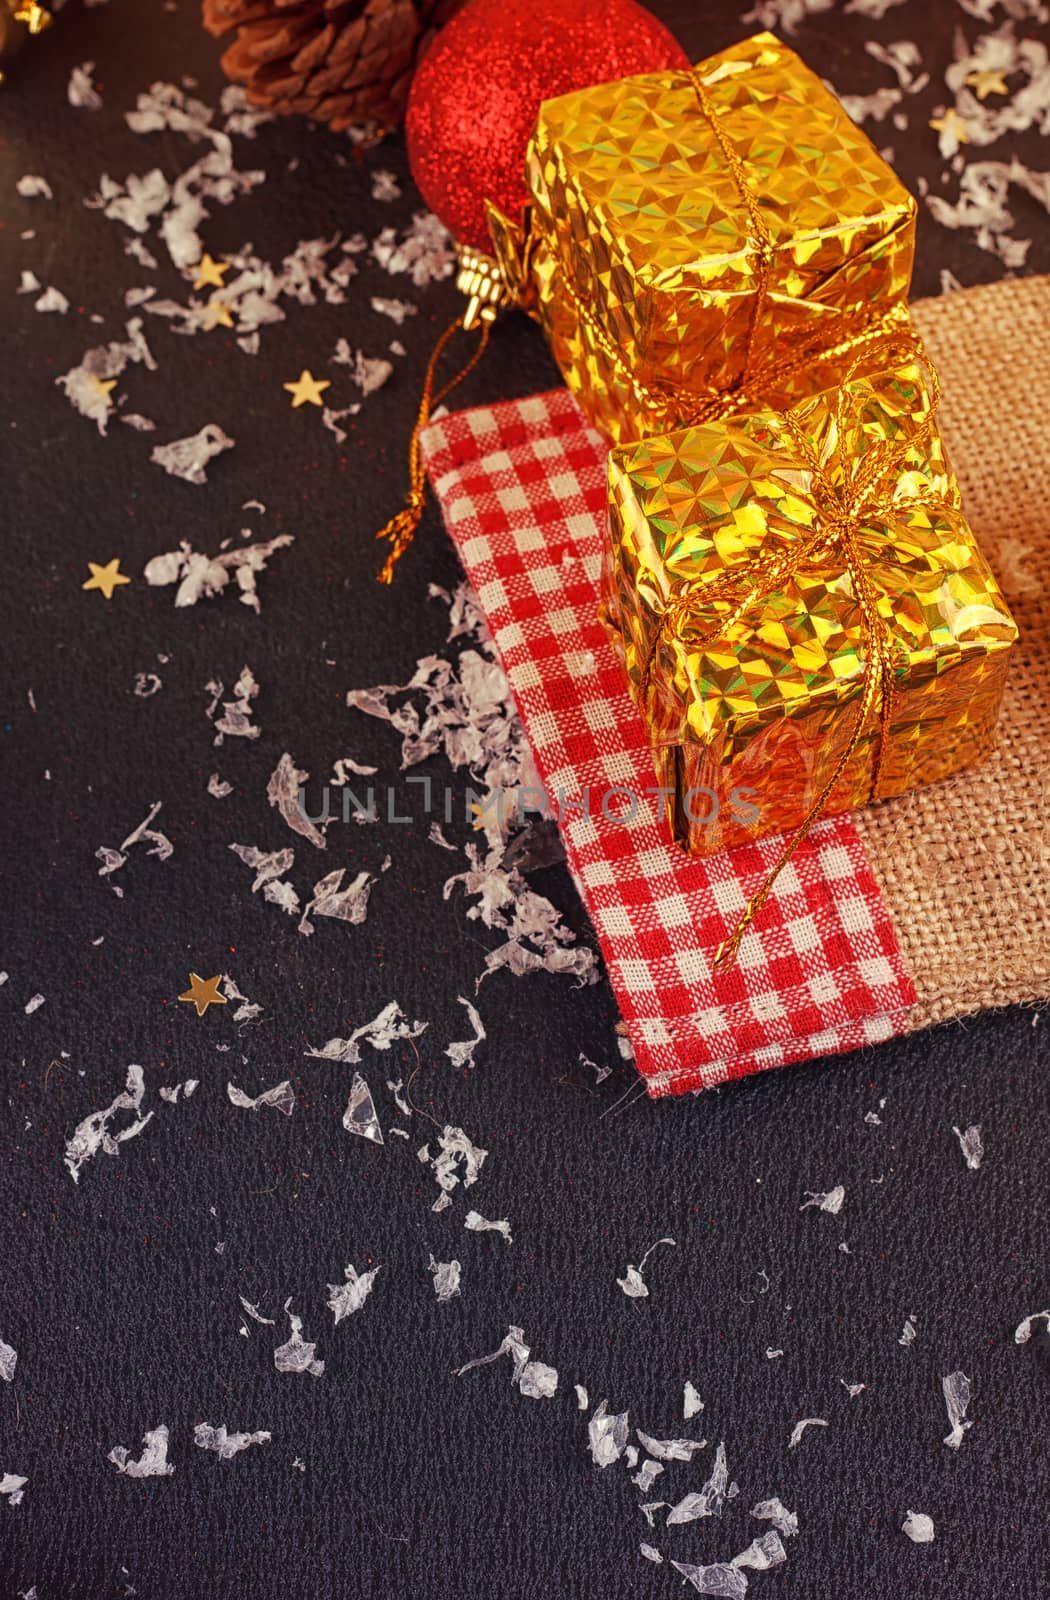 Christmas decorative gift box, ball and drum on black background